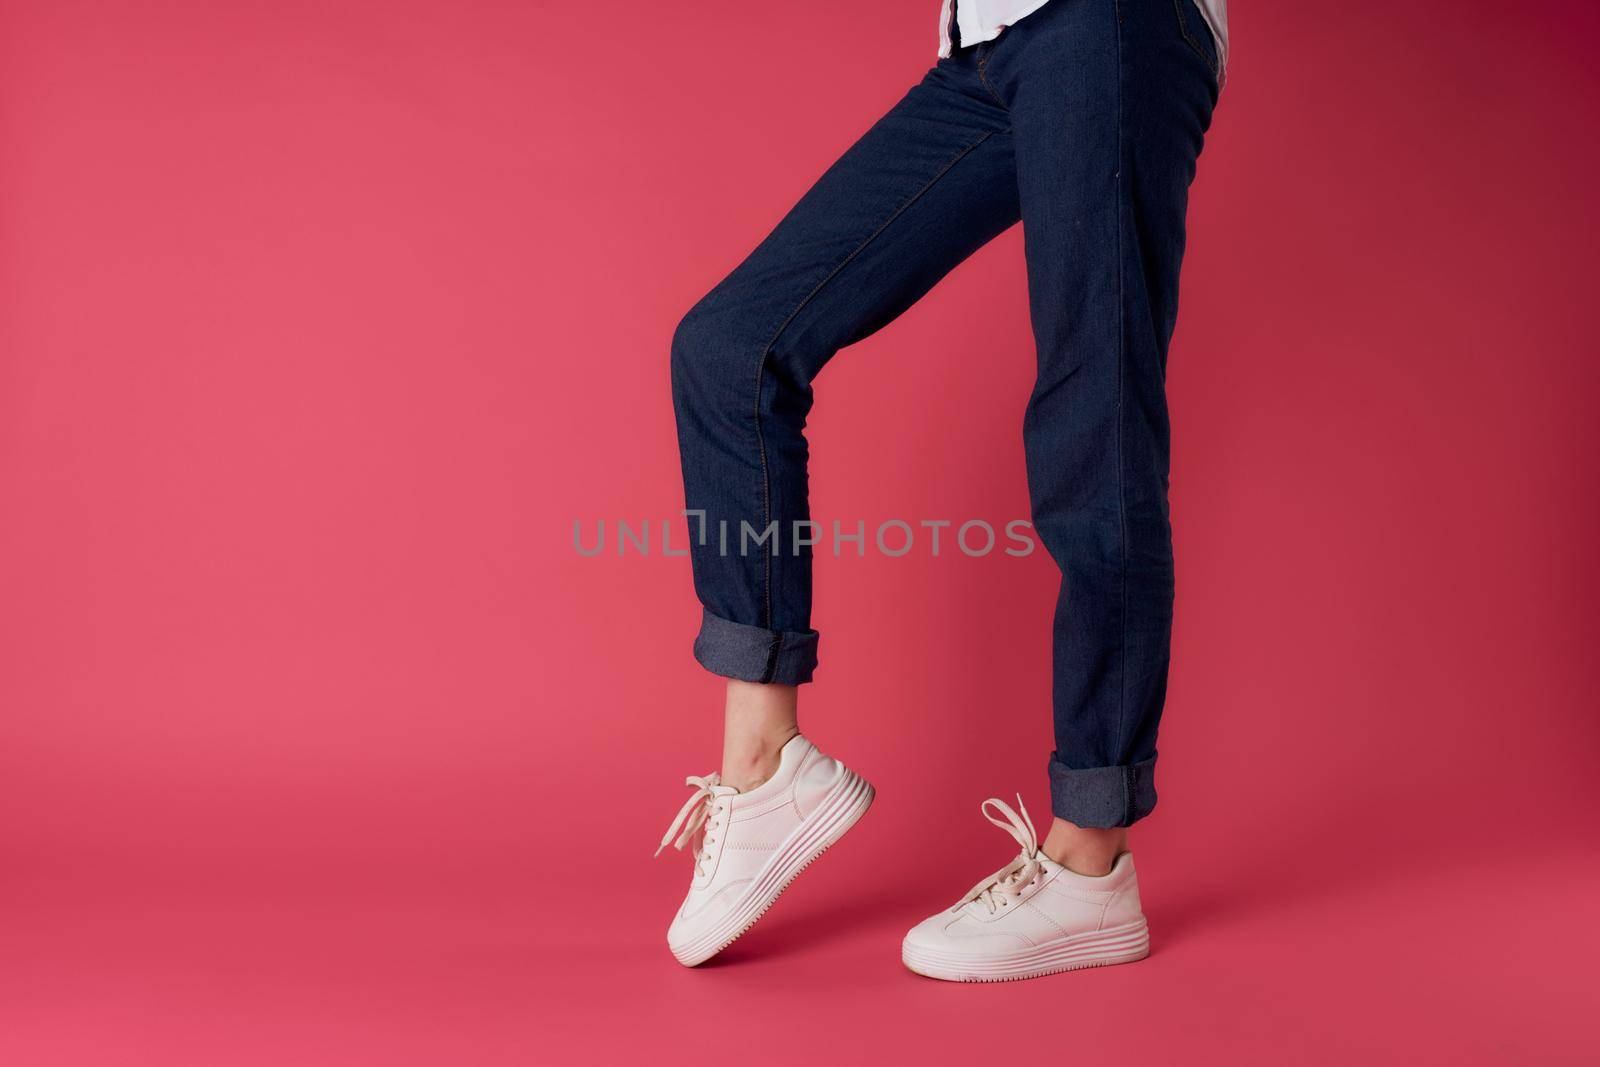 Womens feet white sneakers fashion street style pink background. High quality photo